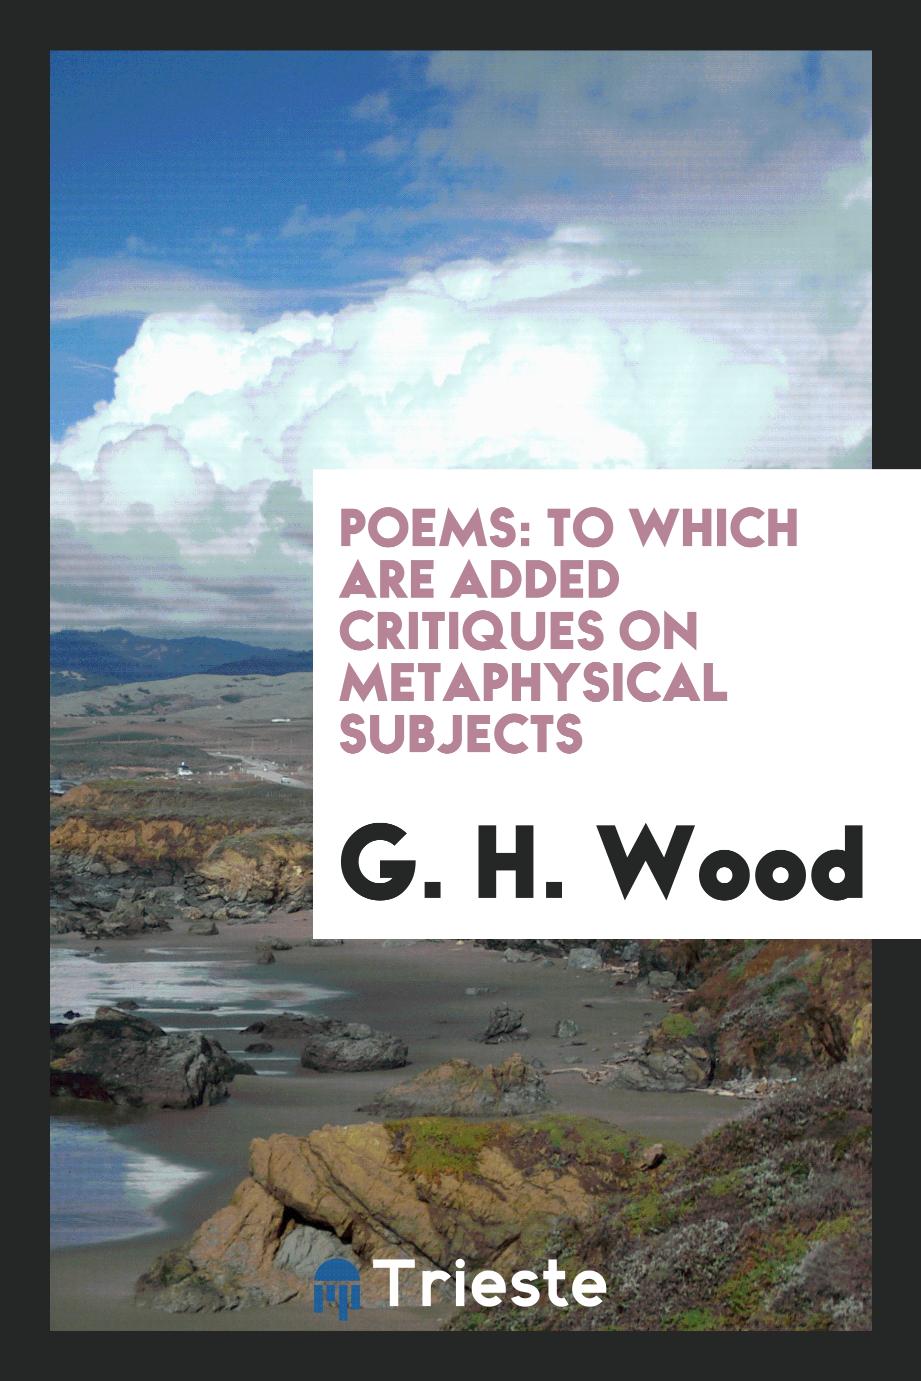 Poems: To Which Are Added Critiques on Metaphysical Subjects